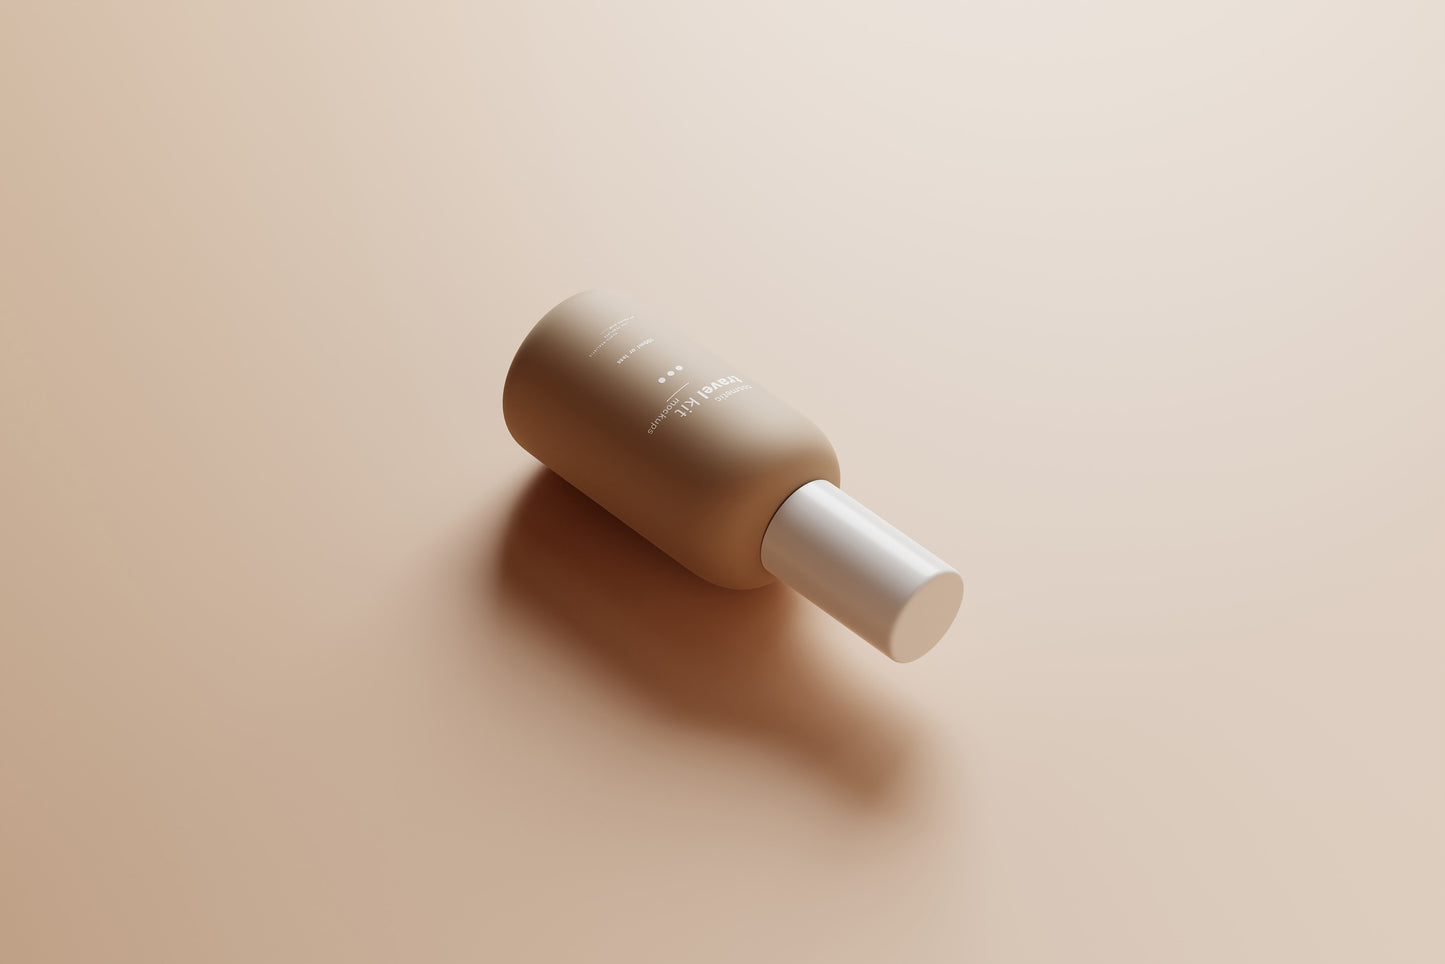 Travel-Size Small Cosmetic Bottle Mockups